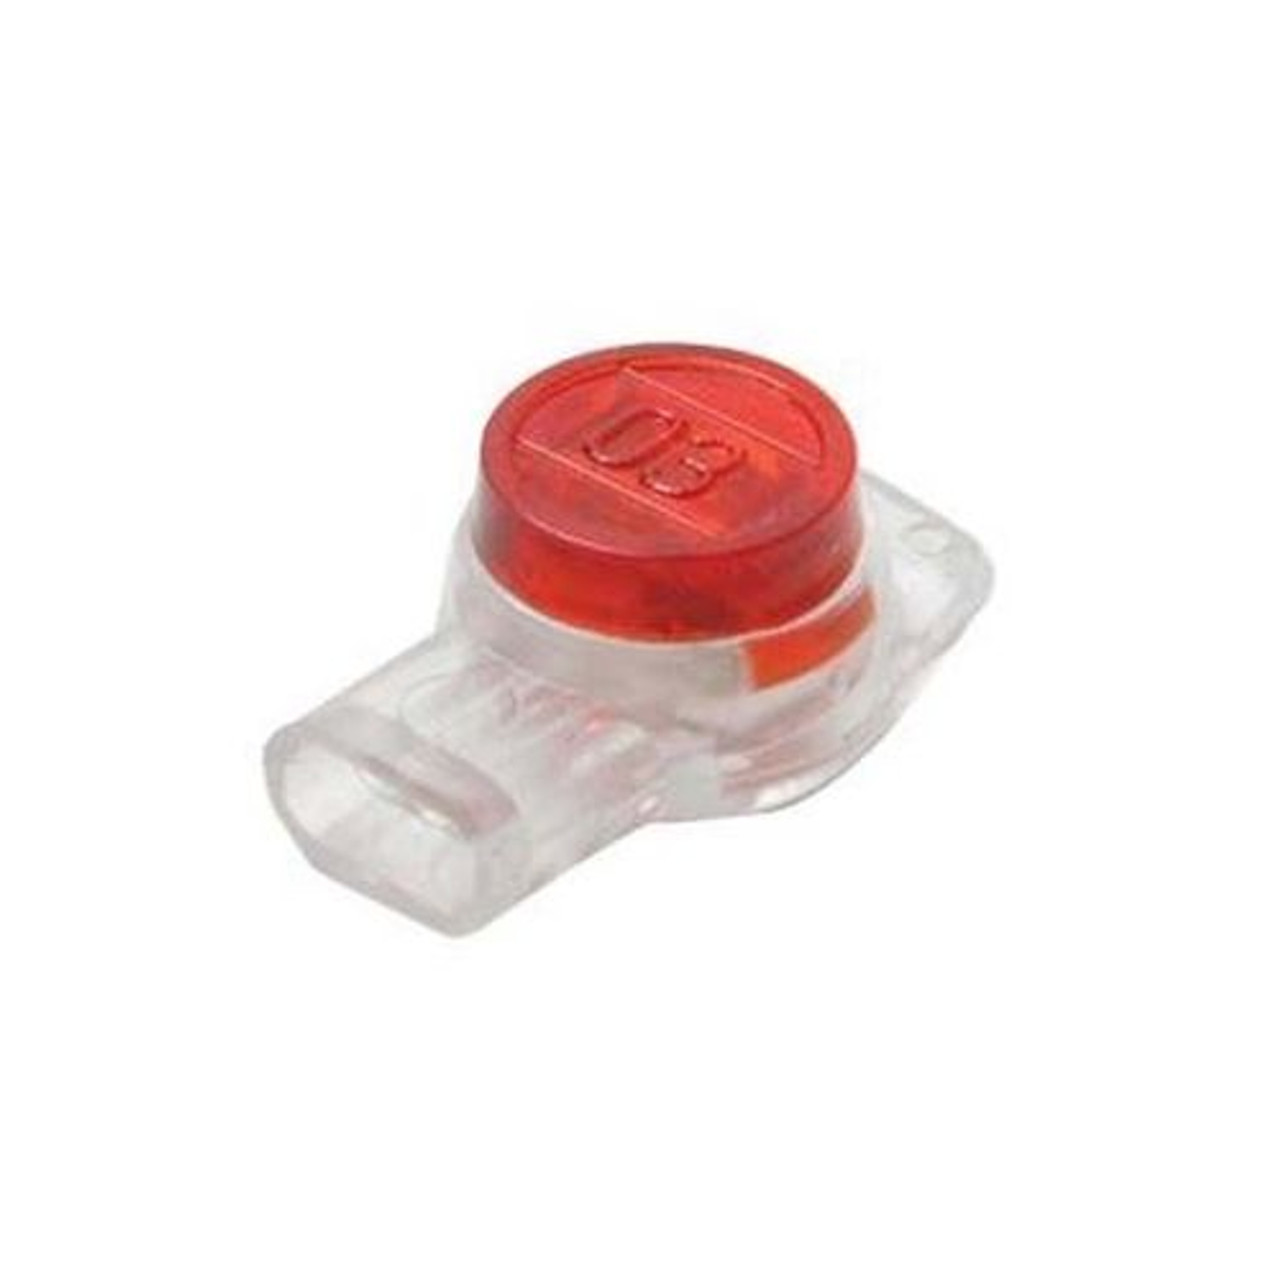 Steren 300-076 UR2 Connector 1DC 3-Wire Red Slice 1 DC Insulation Displacement Connector Red Button Scotchlok 3M Type Telephone Crimp 19-26 AWG UG Modular Data Squeeze Connectors, Sold as Single, Part # 300076